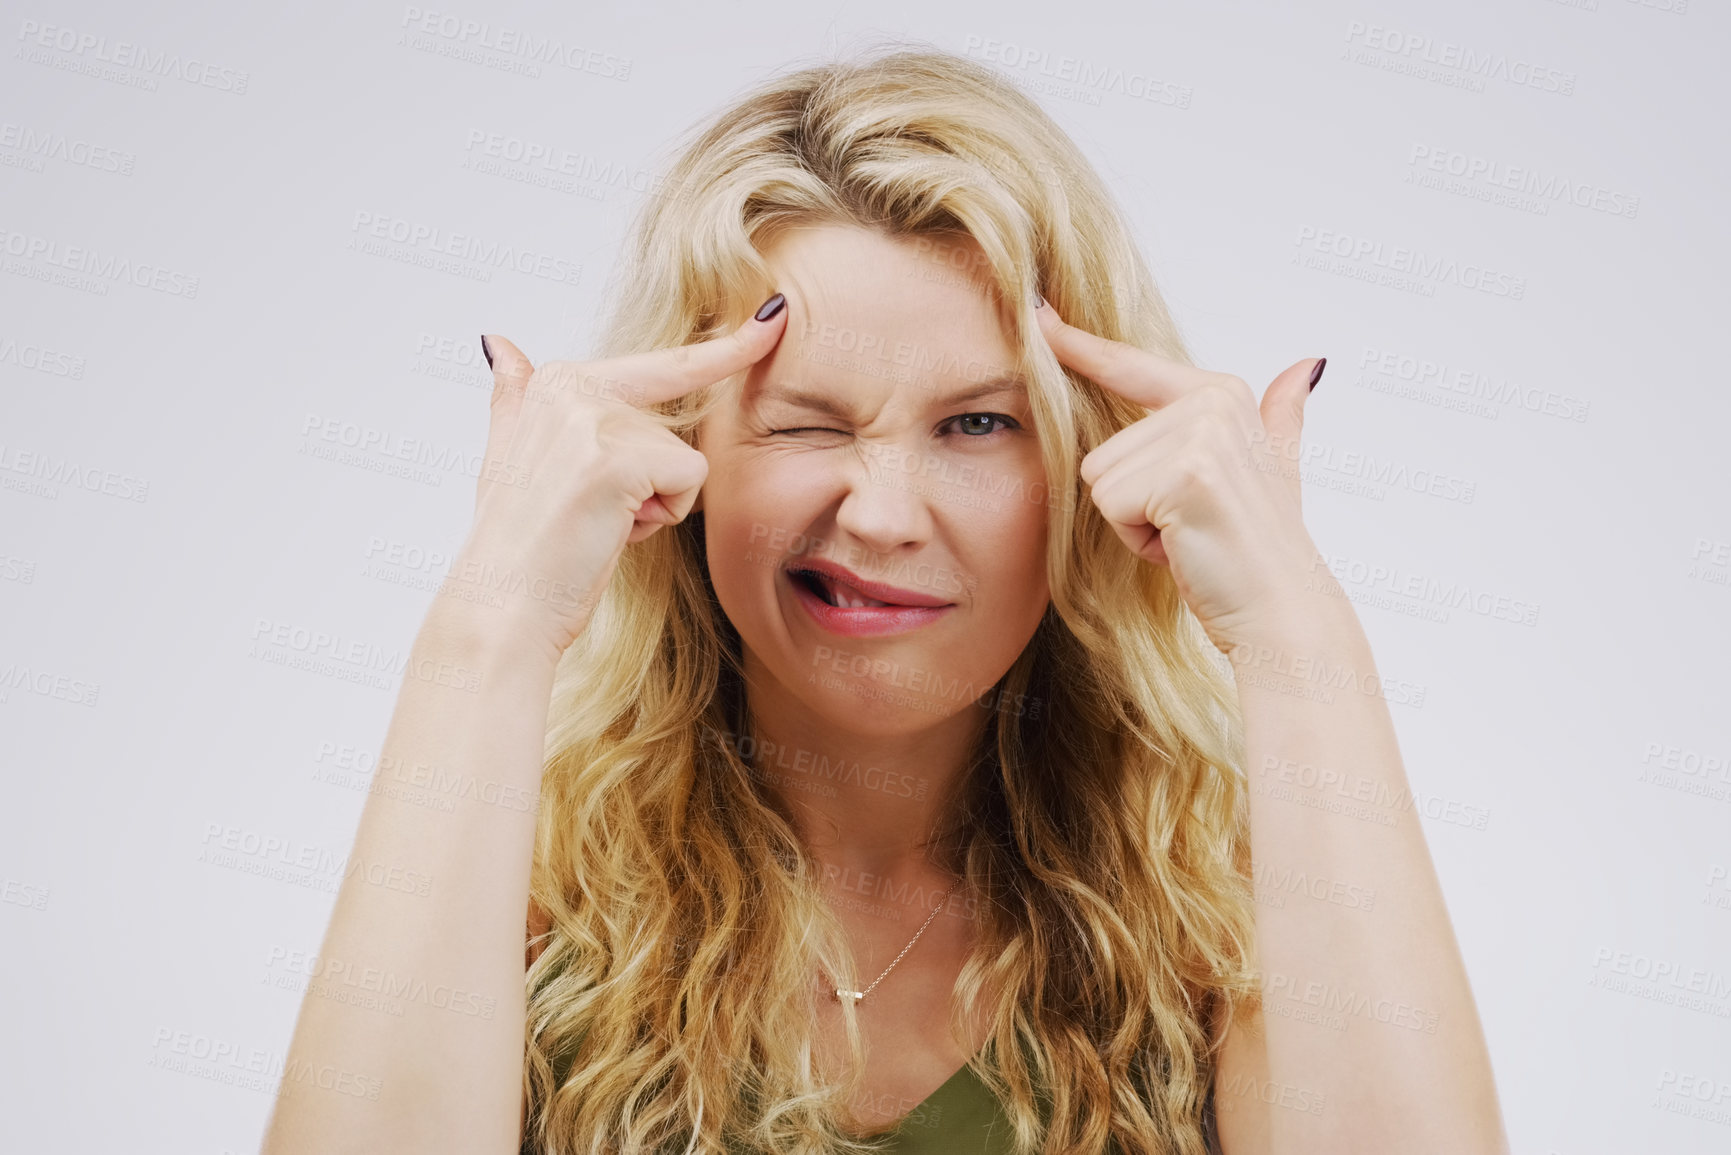 Buy stock photo Portrait, funny face and fingers on head with a woman in studio on a gray background looking silly or goofy. Comedy, comic and mental with a crazy young female person joking for fun or playful humor